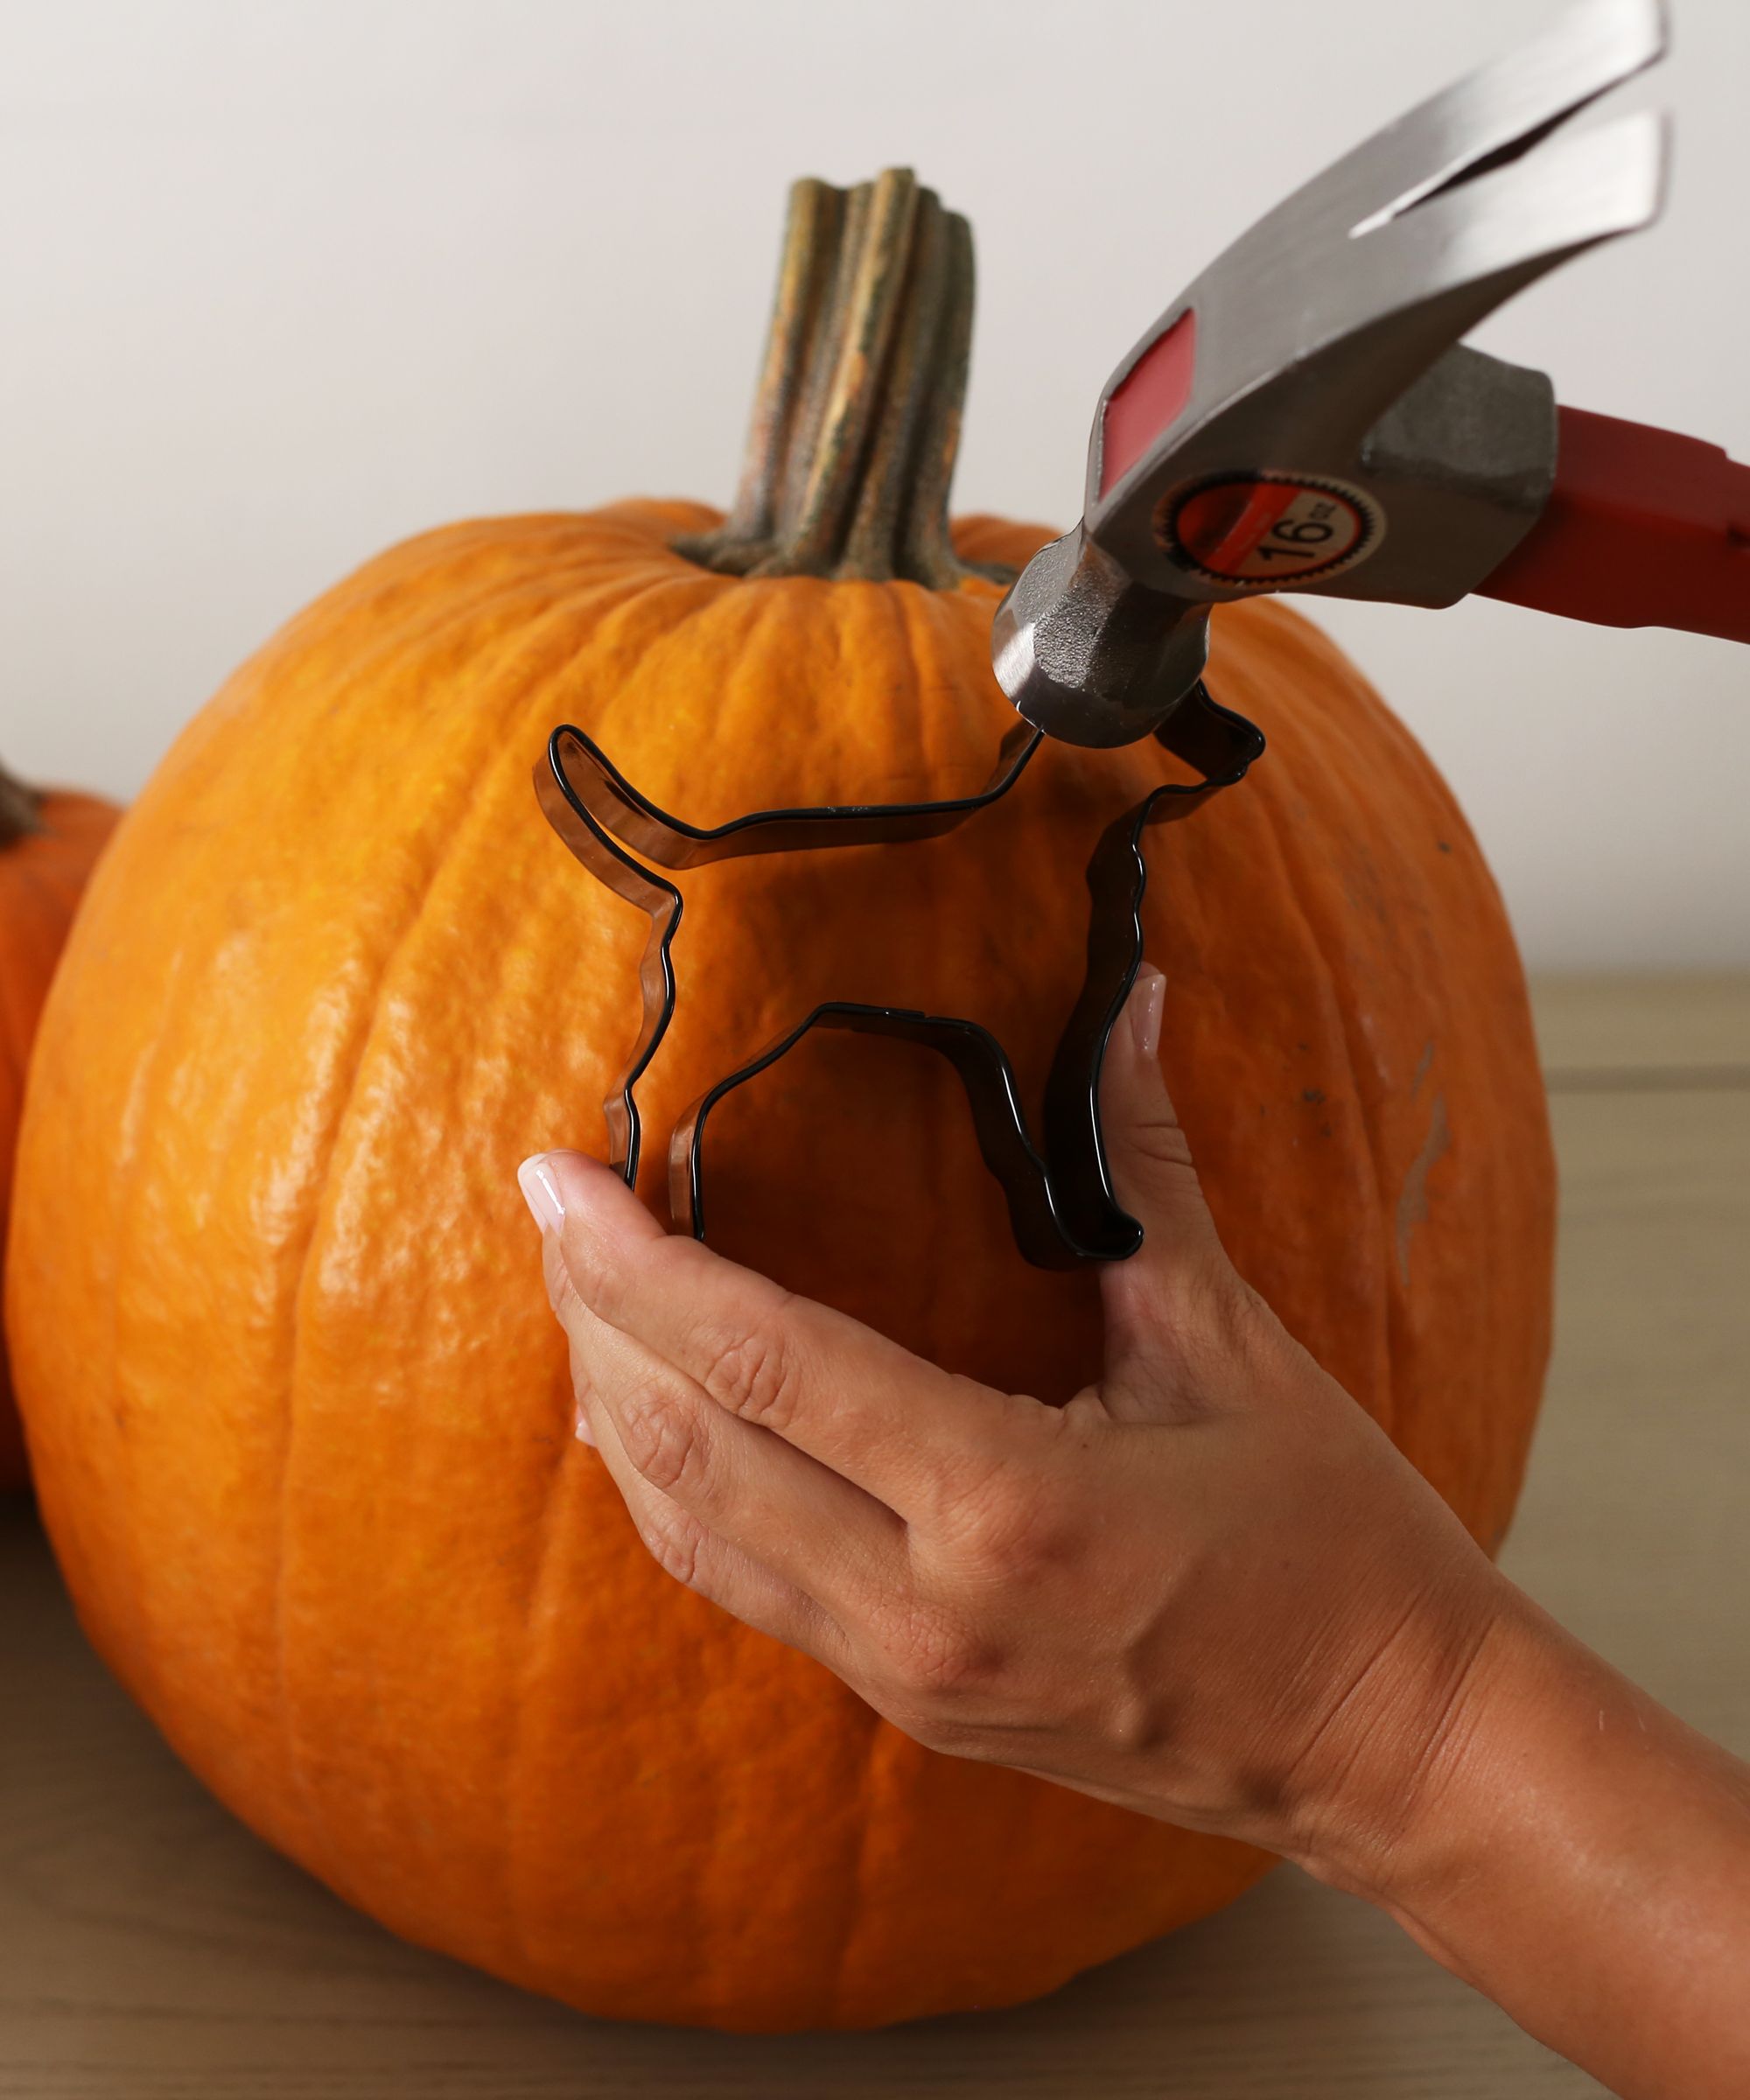 A super easy idea for a DIY pumpkin carvings. Use cookie cutters!